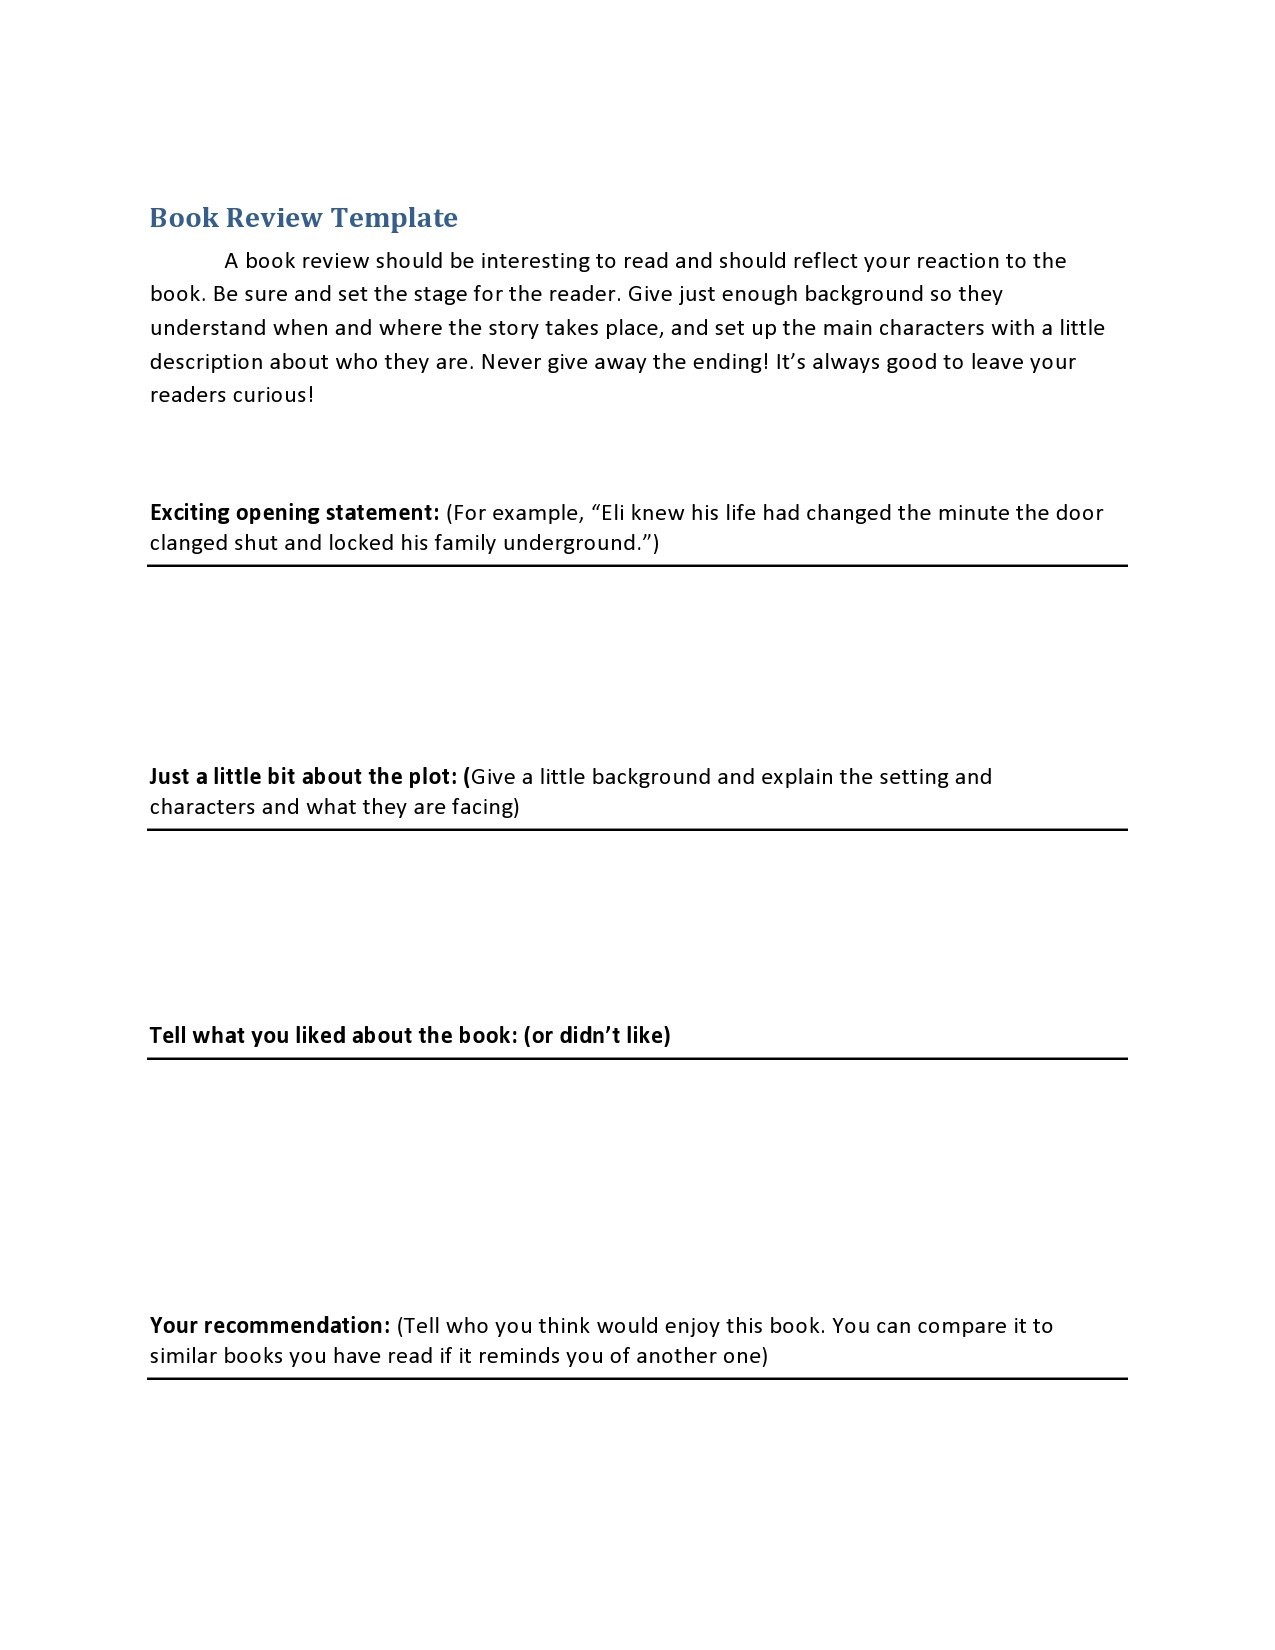 Free book review template 18